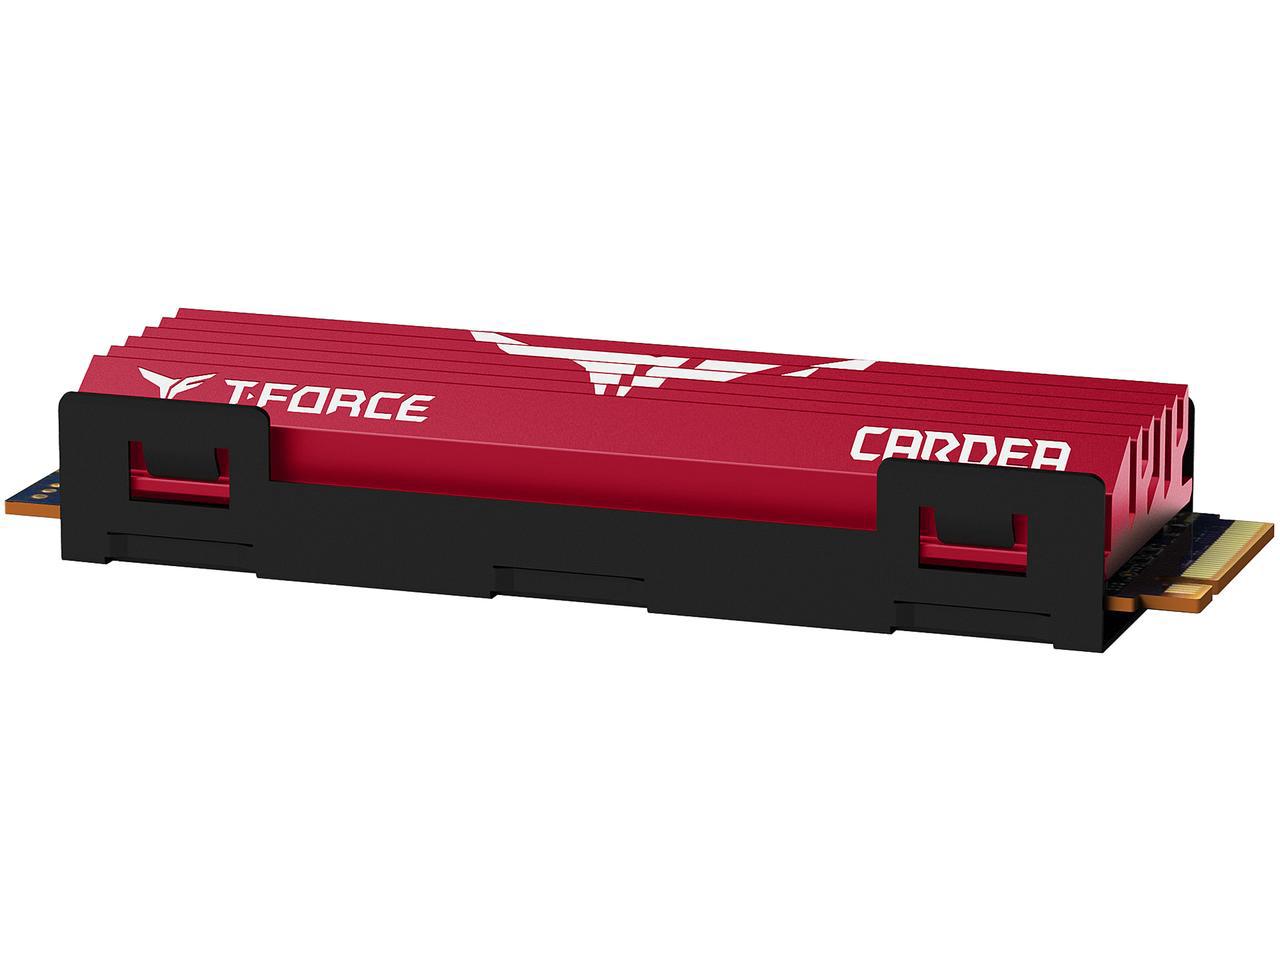 Team Group T-Force Cardea M.2 SSD 2280 480GB PCI-e 3.0 x4 with NVMe 1.2 Internal